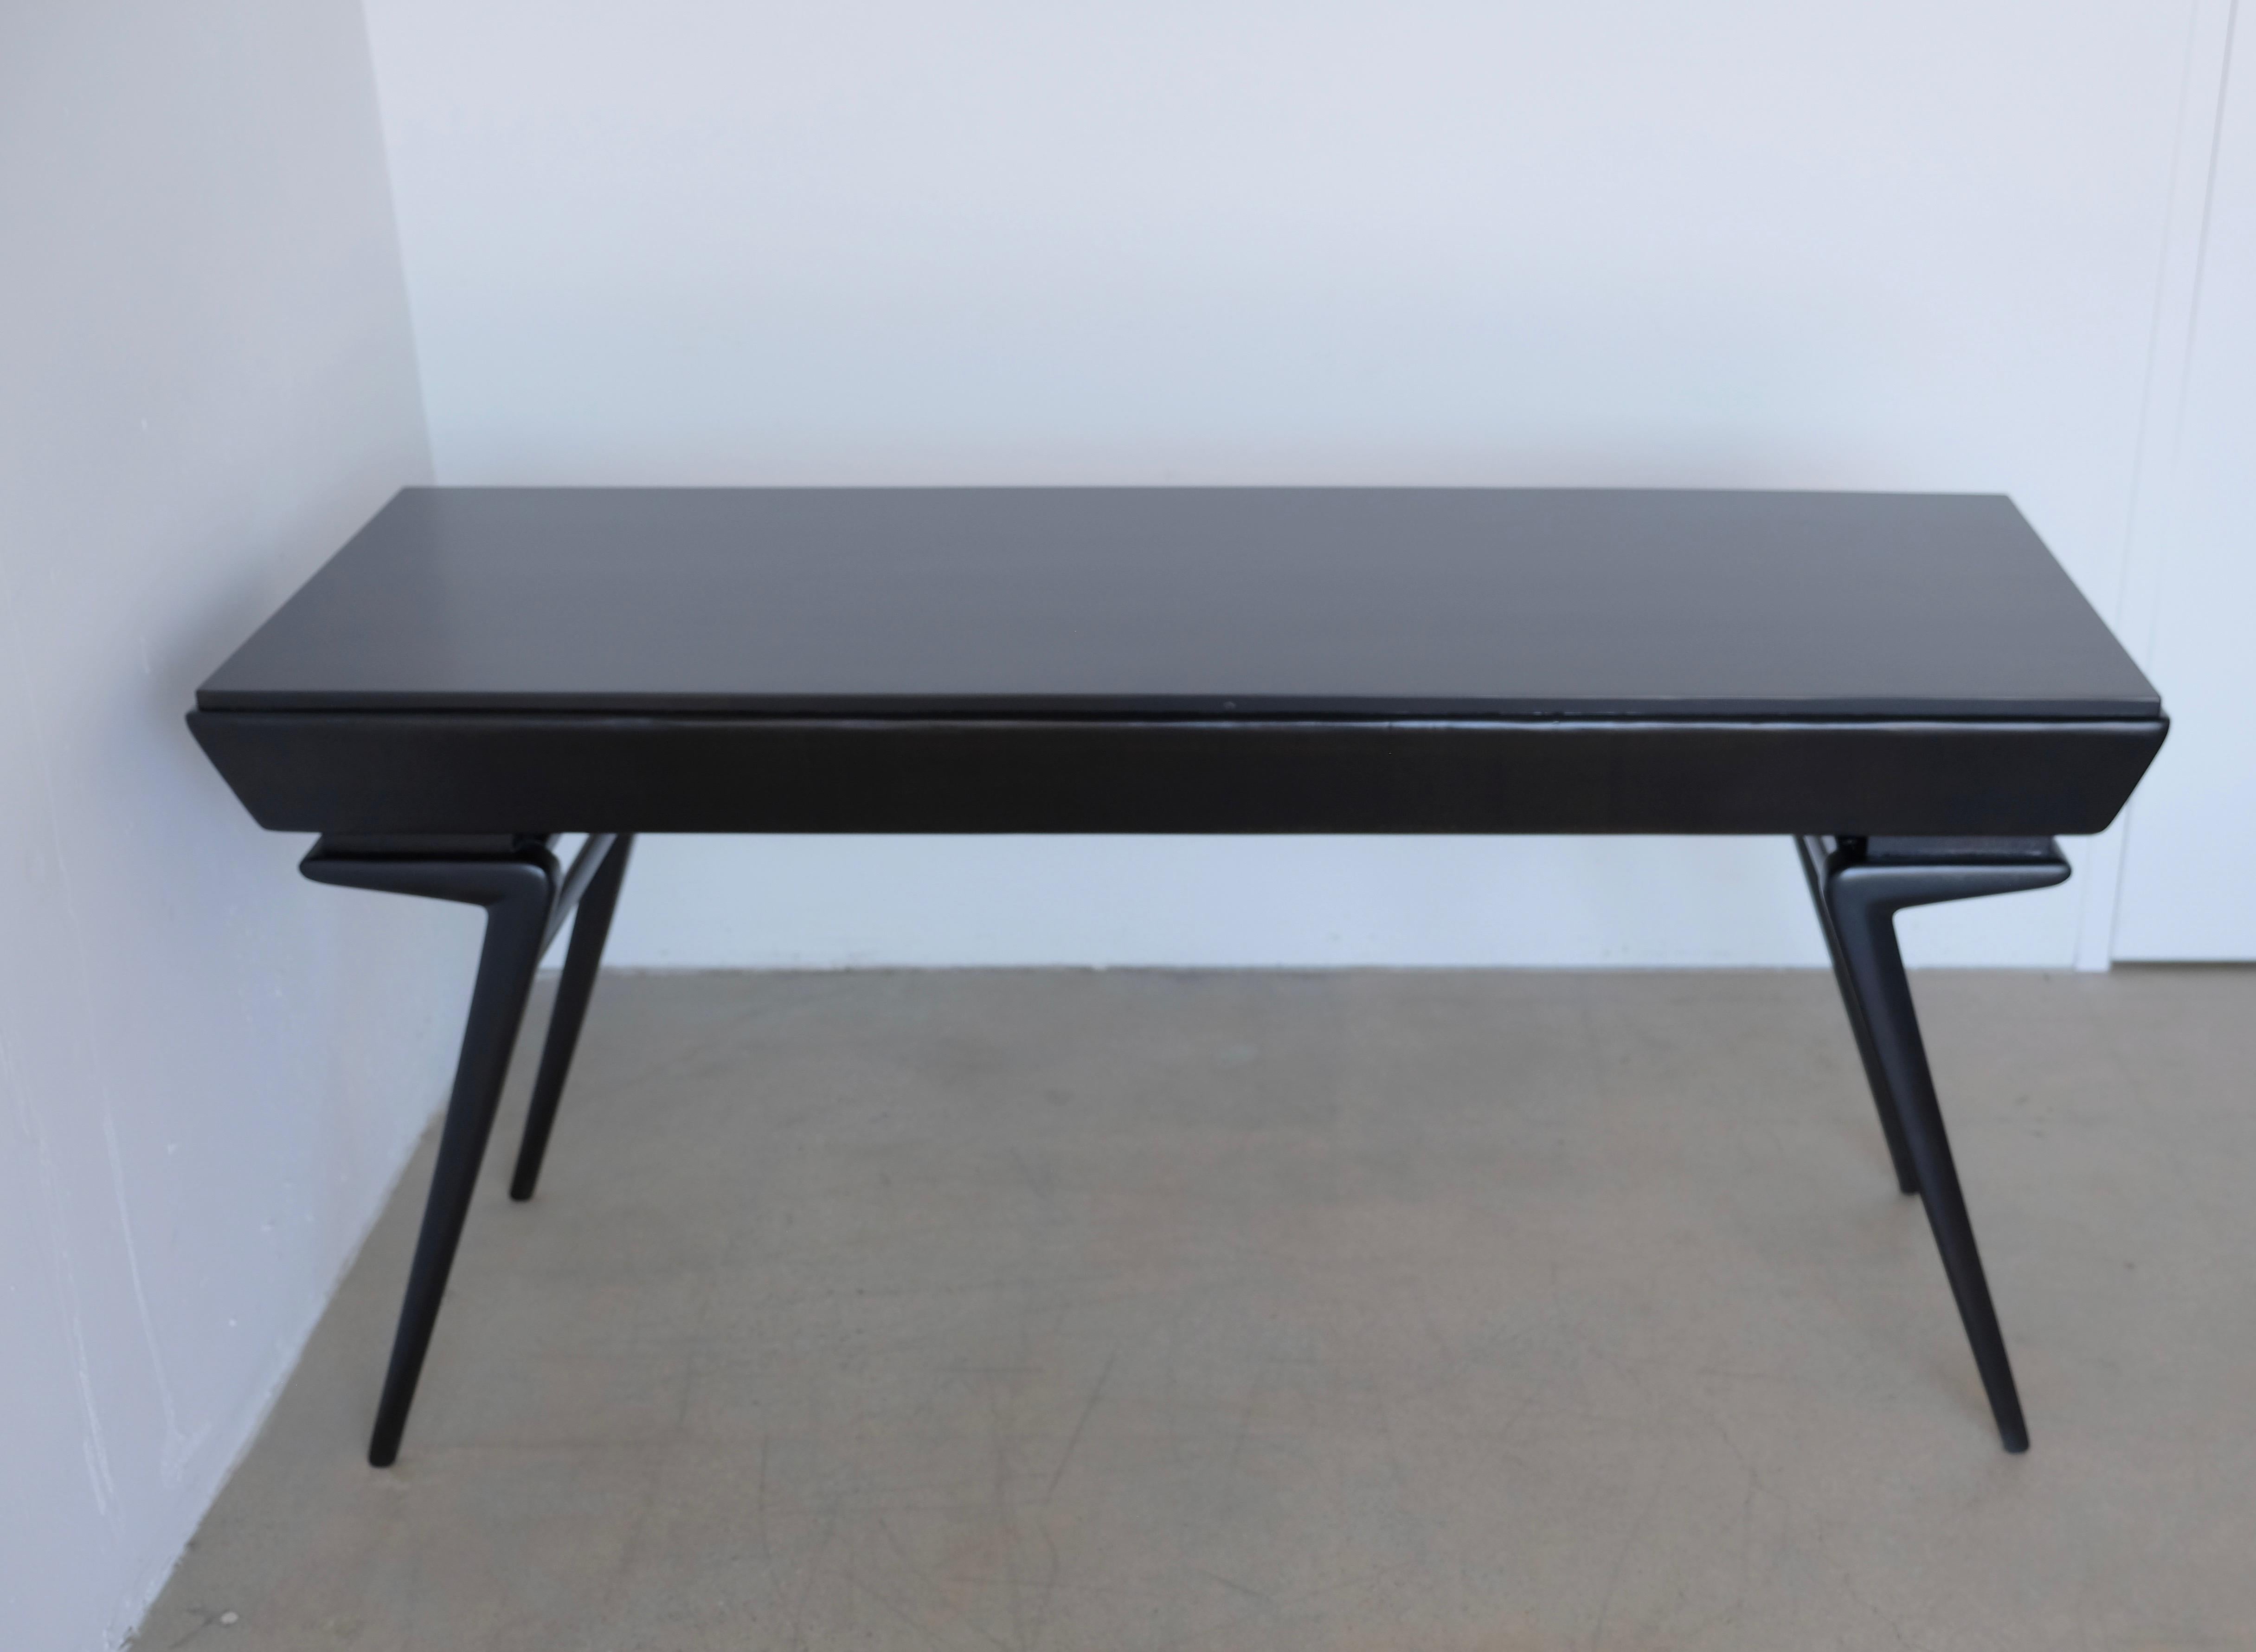 A handsome vintage desk that has been freshly ebonized with a beautiful black stain that allows a bit of the wood grain to show through. The top of the desk is a laminate type material. The desk has angled legs reminiscent of the work of Ico Parisi.